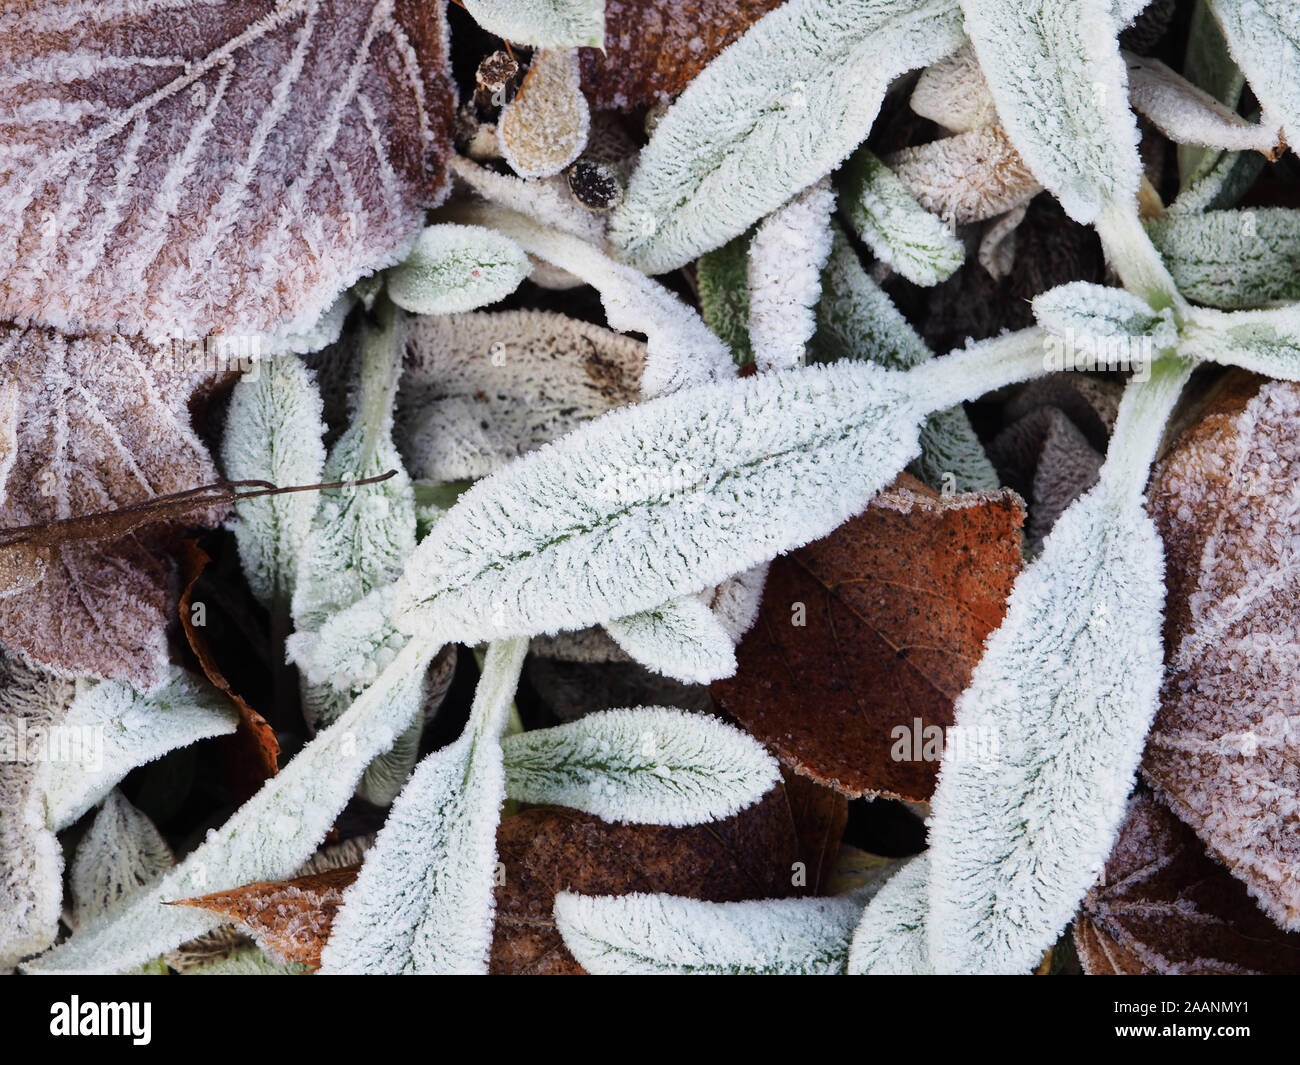 Frozen Leaves. Texture of some leaves covered by snow and ice on a winter day. Background of fall dead leaves, Hoar frosted grass, weeds and leaves. Stock Photo